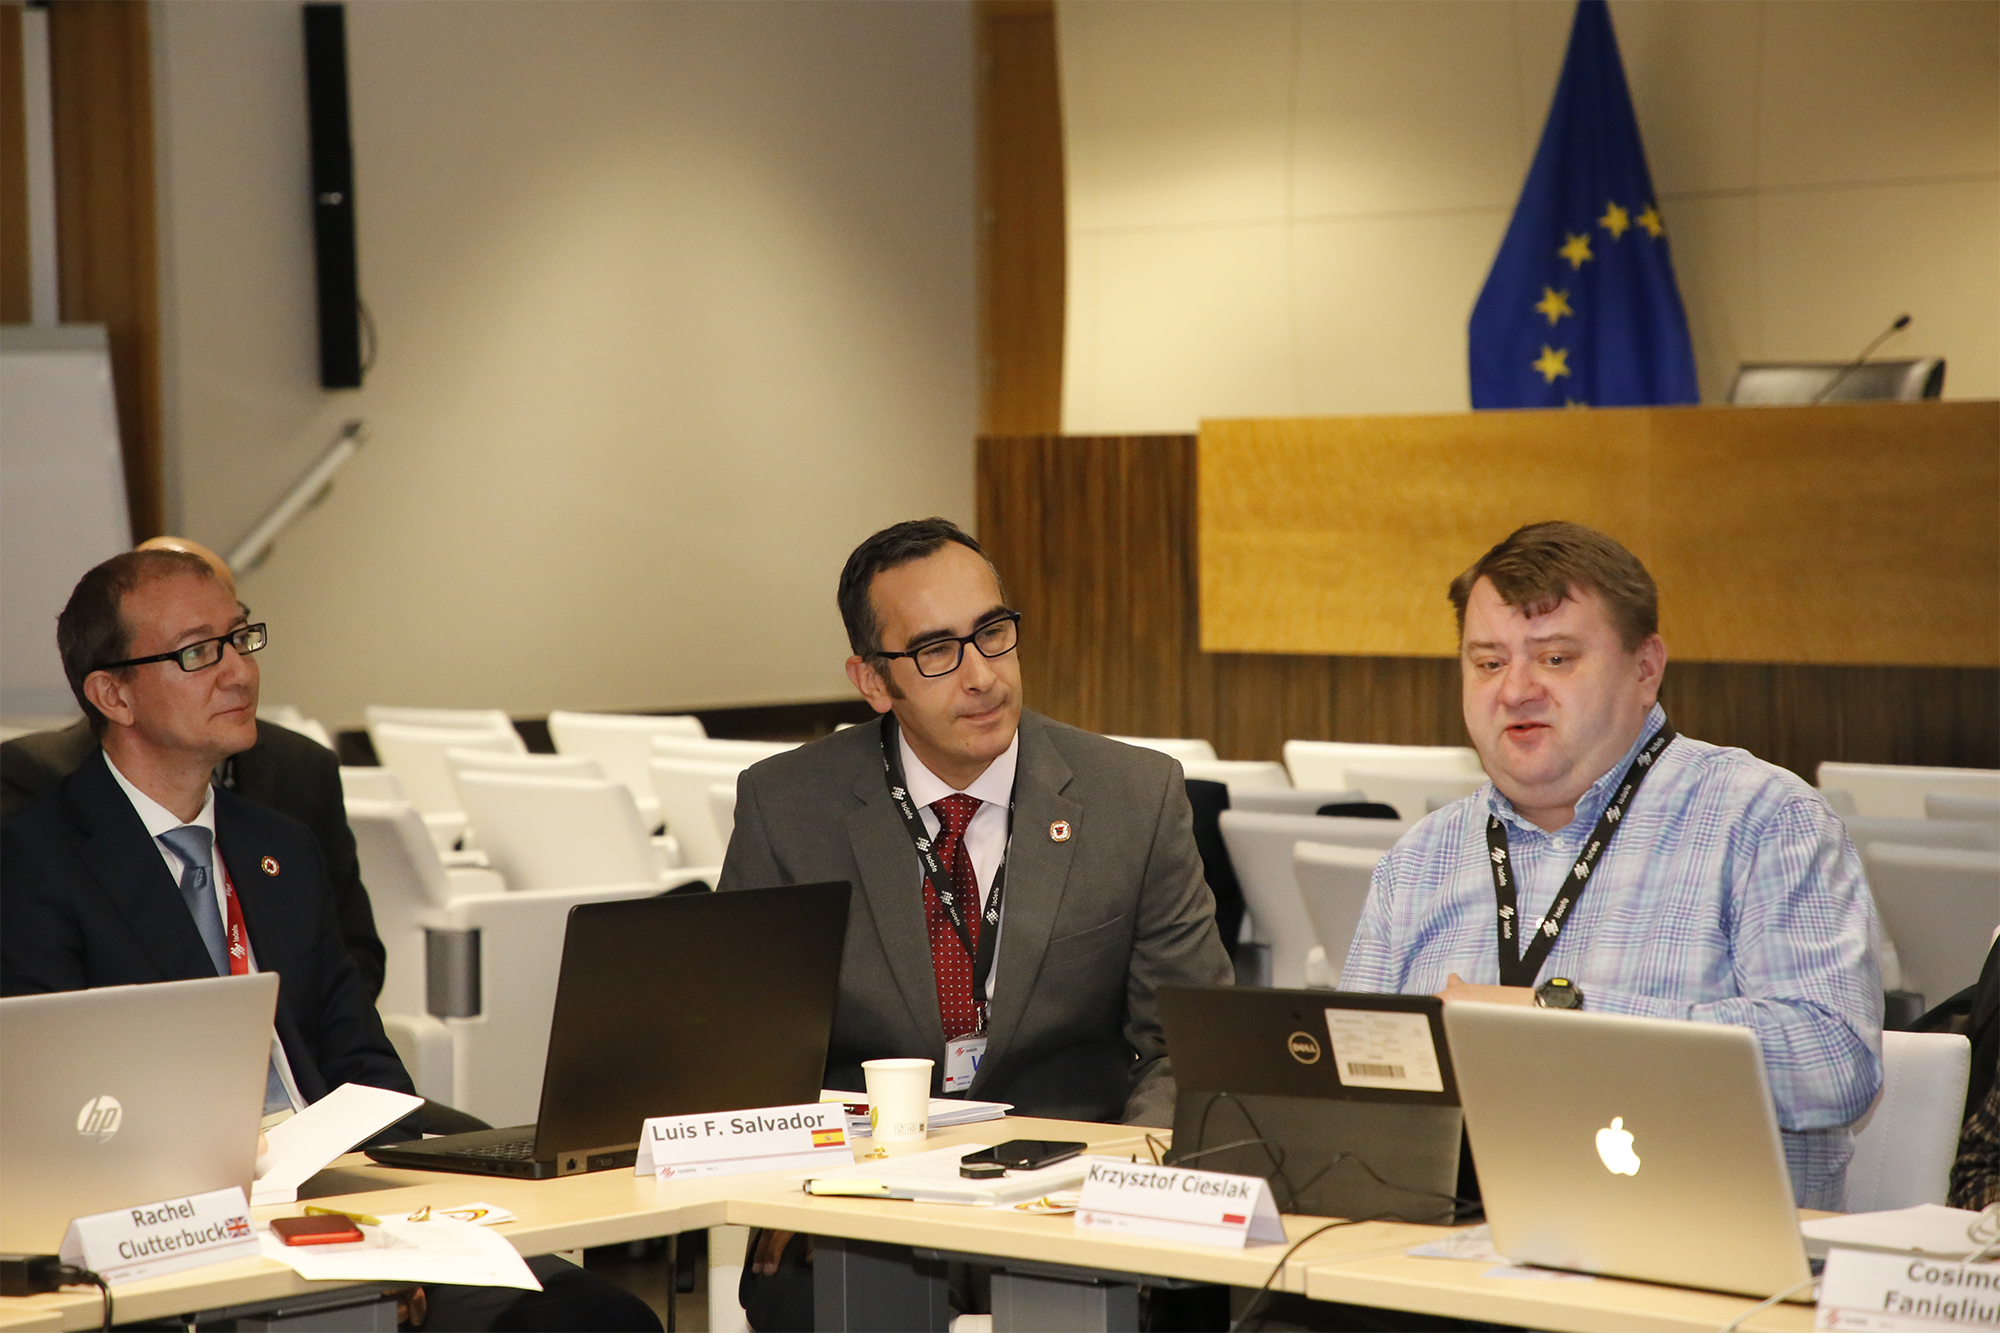 The Network Management Group of the Consultation, Command and Control Allied Panel holds its 16th meeting